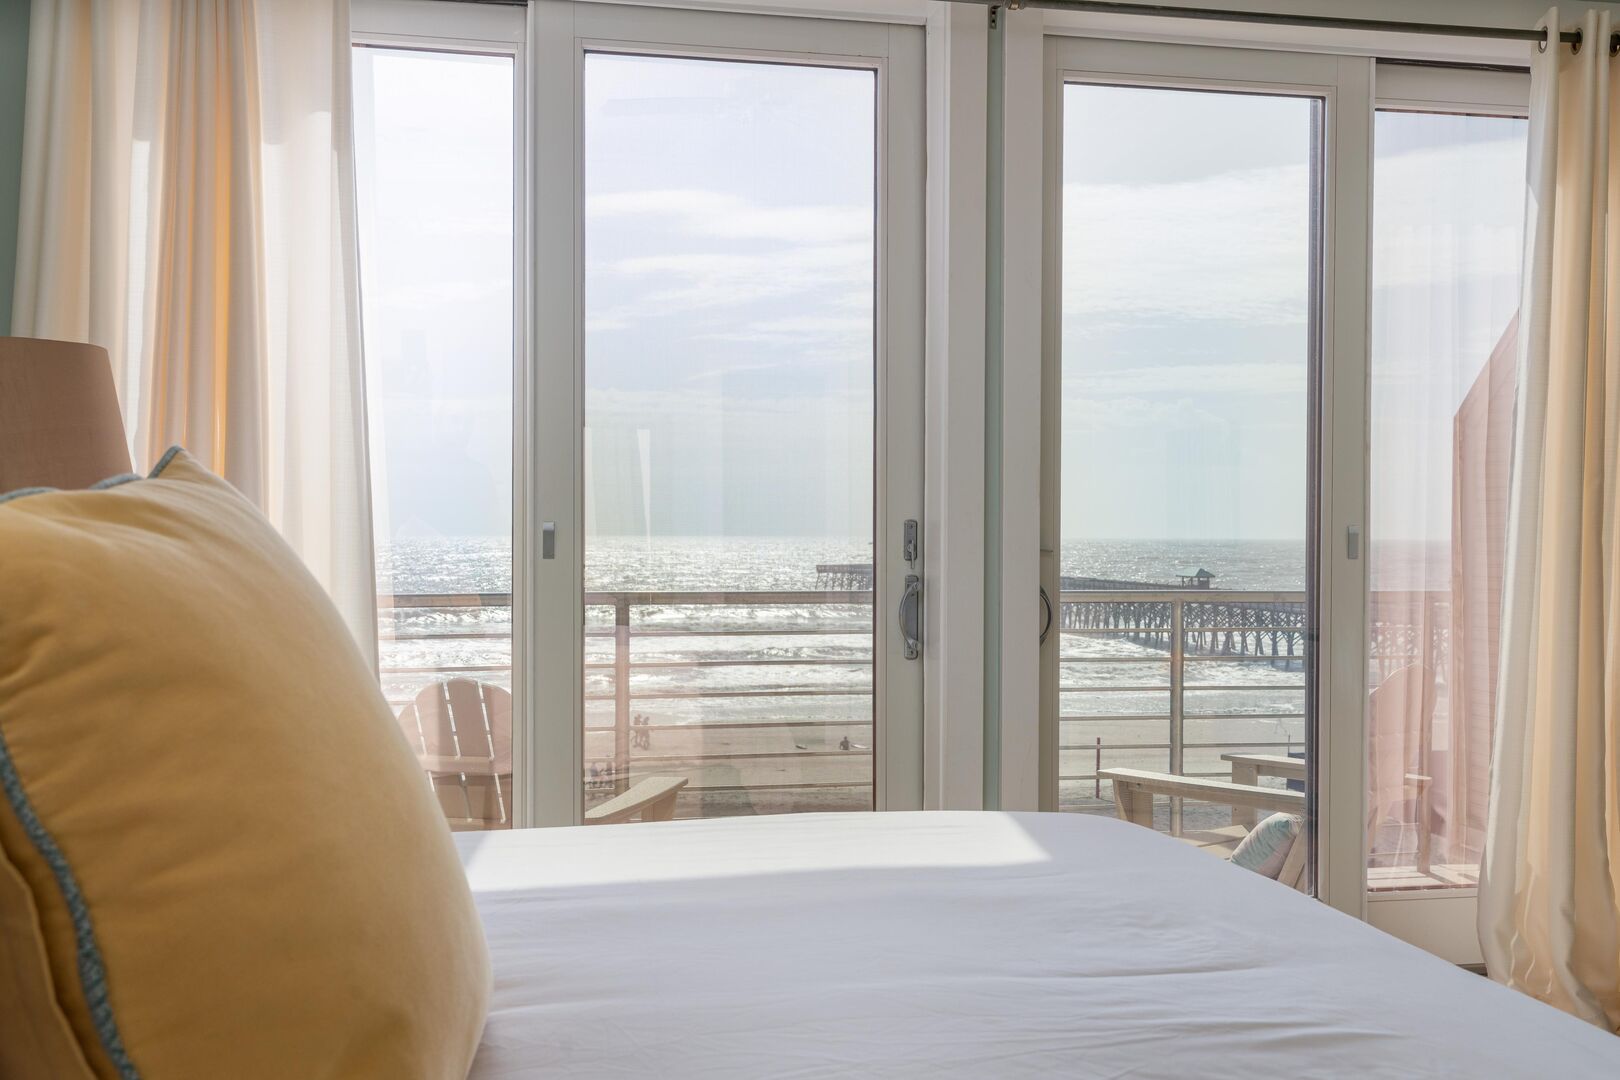 Master bedroom 3 ensuite with balcony and stunning views of the ocean and pier